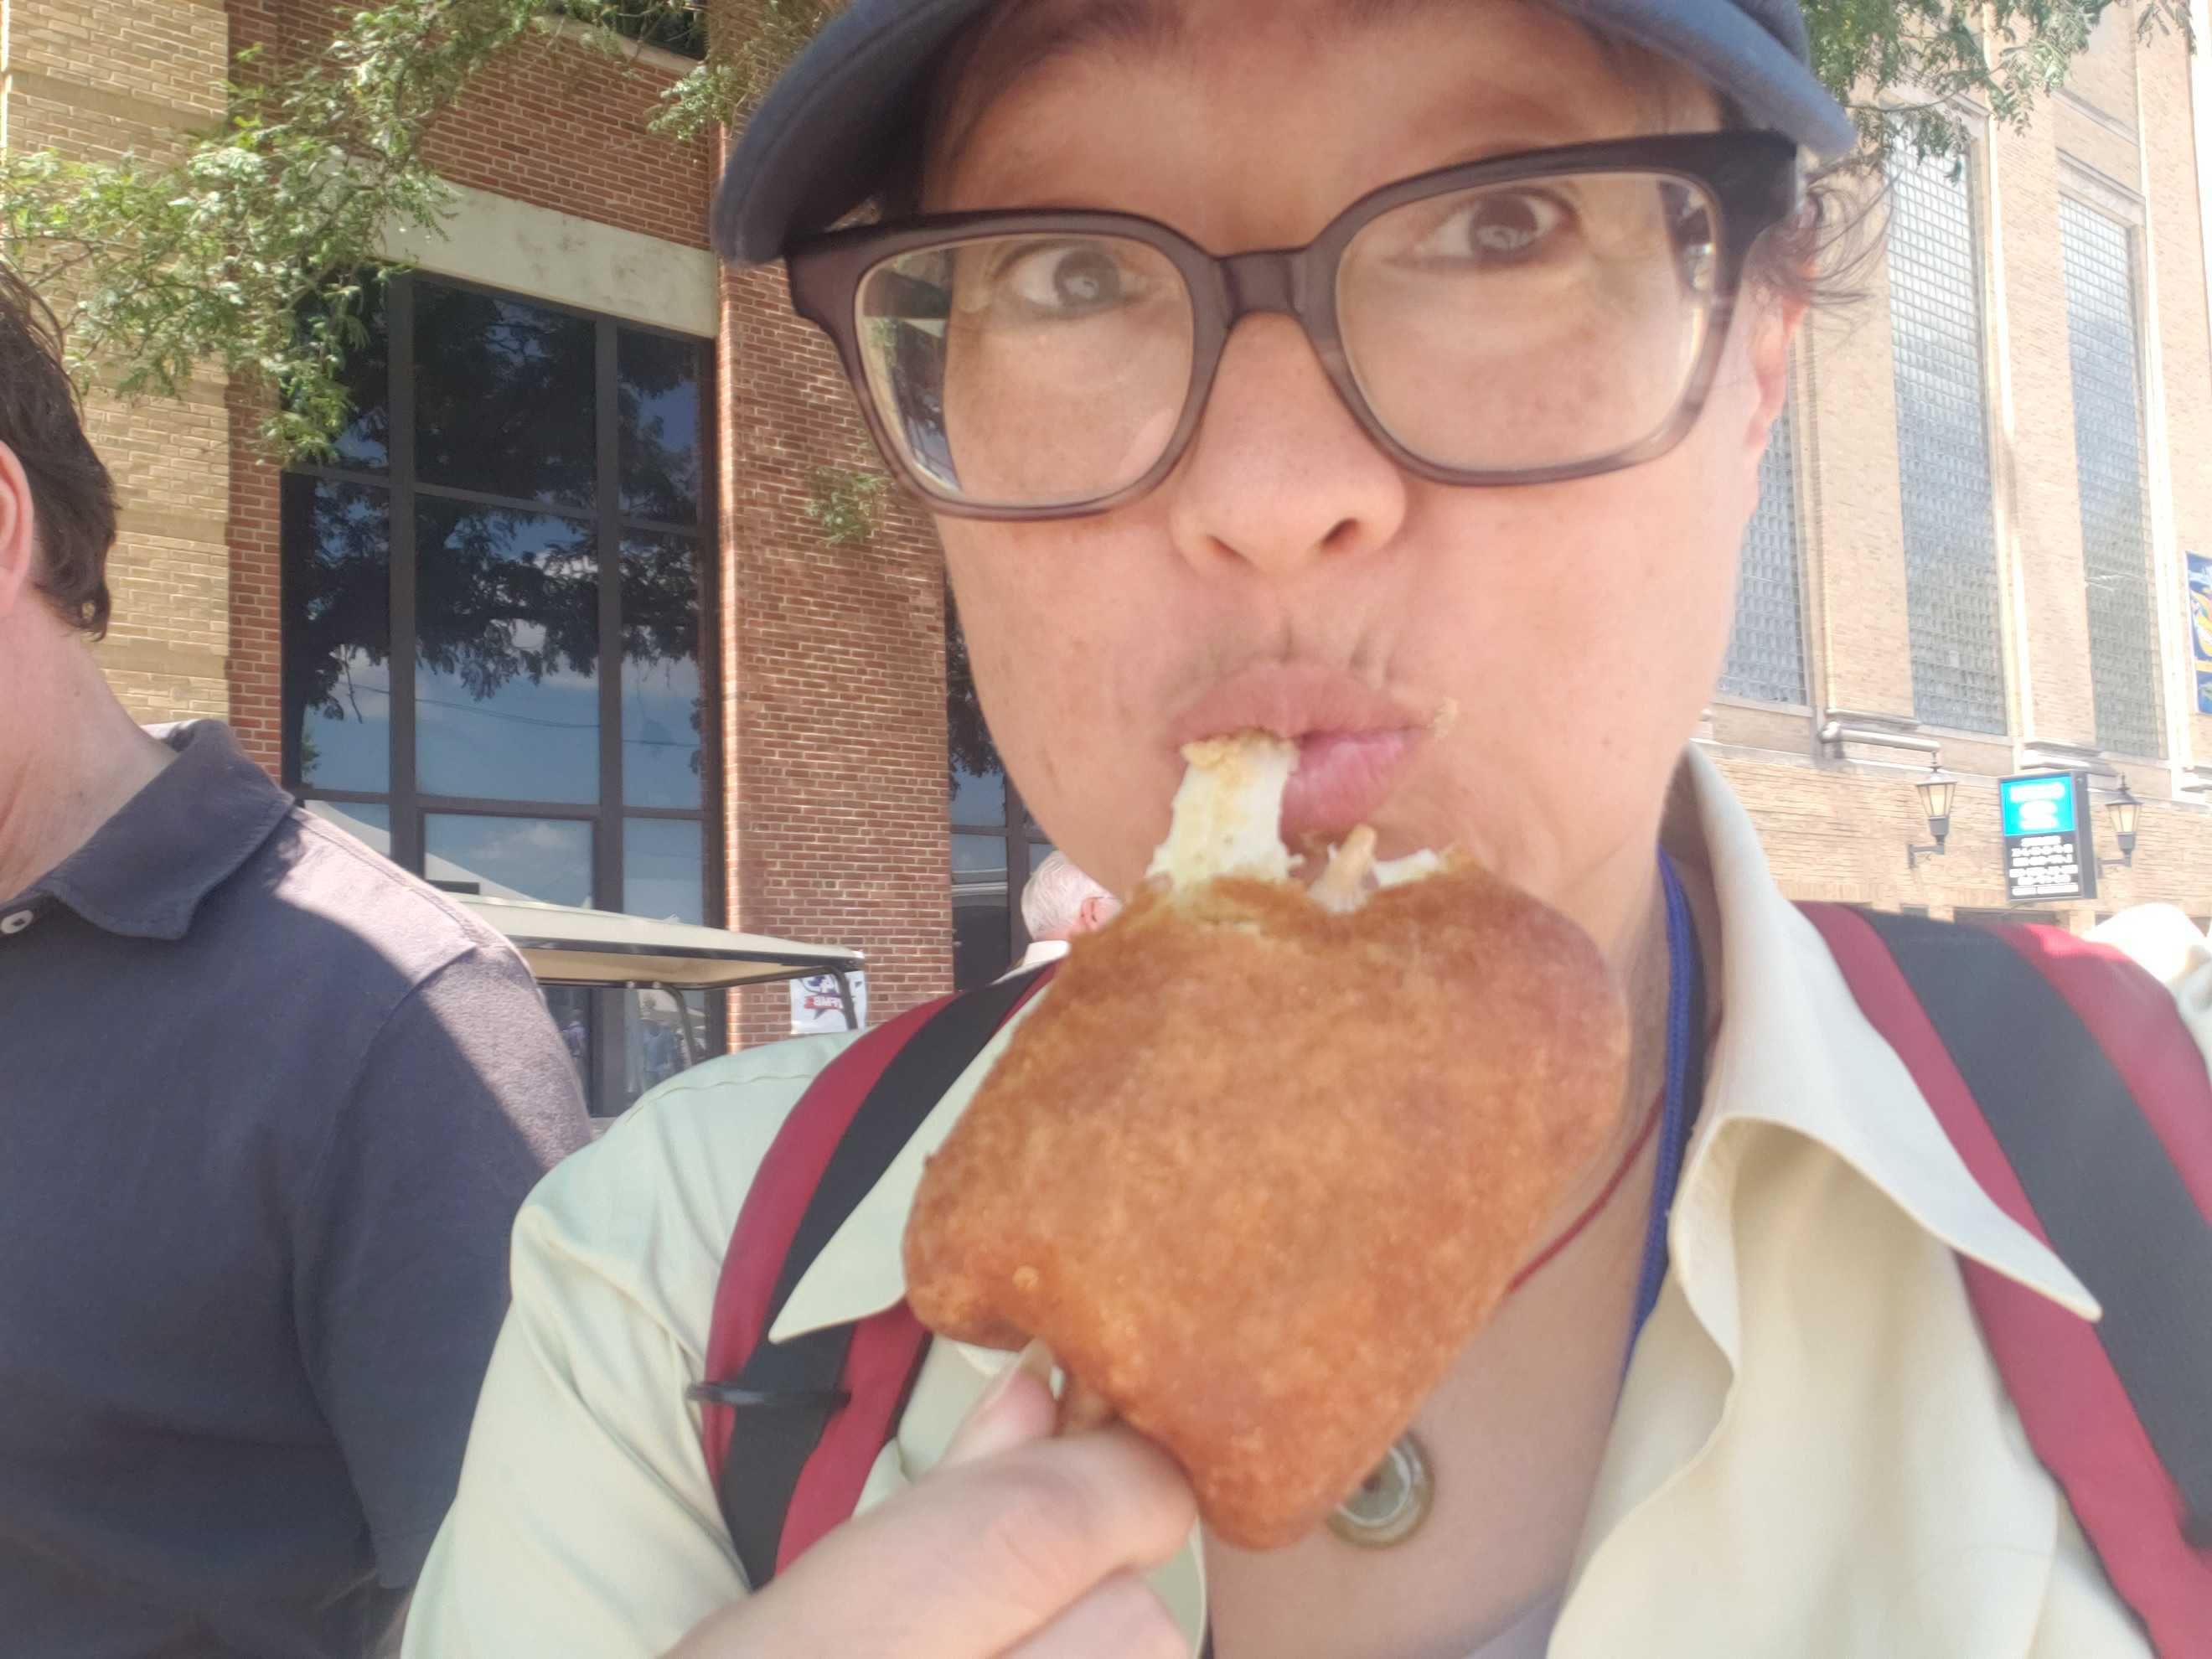 Photo of a woman eating a cheesy breaded item on a stick. 